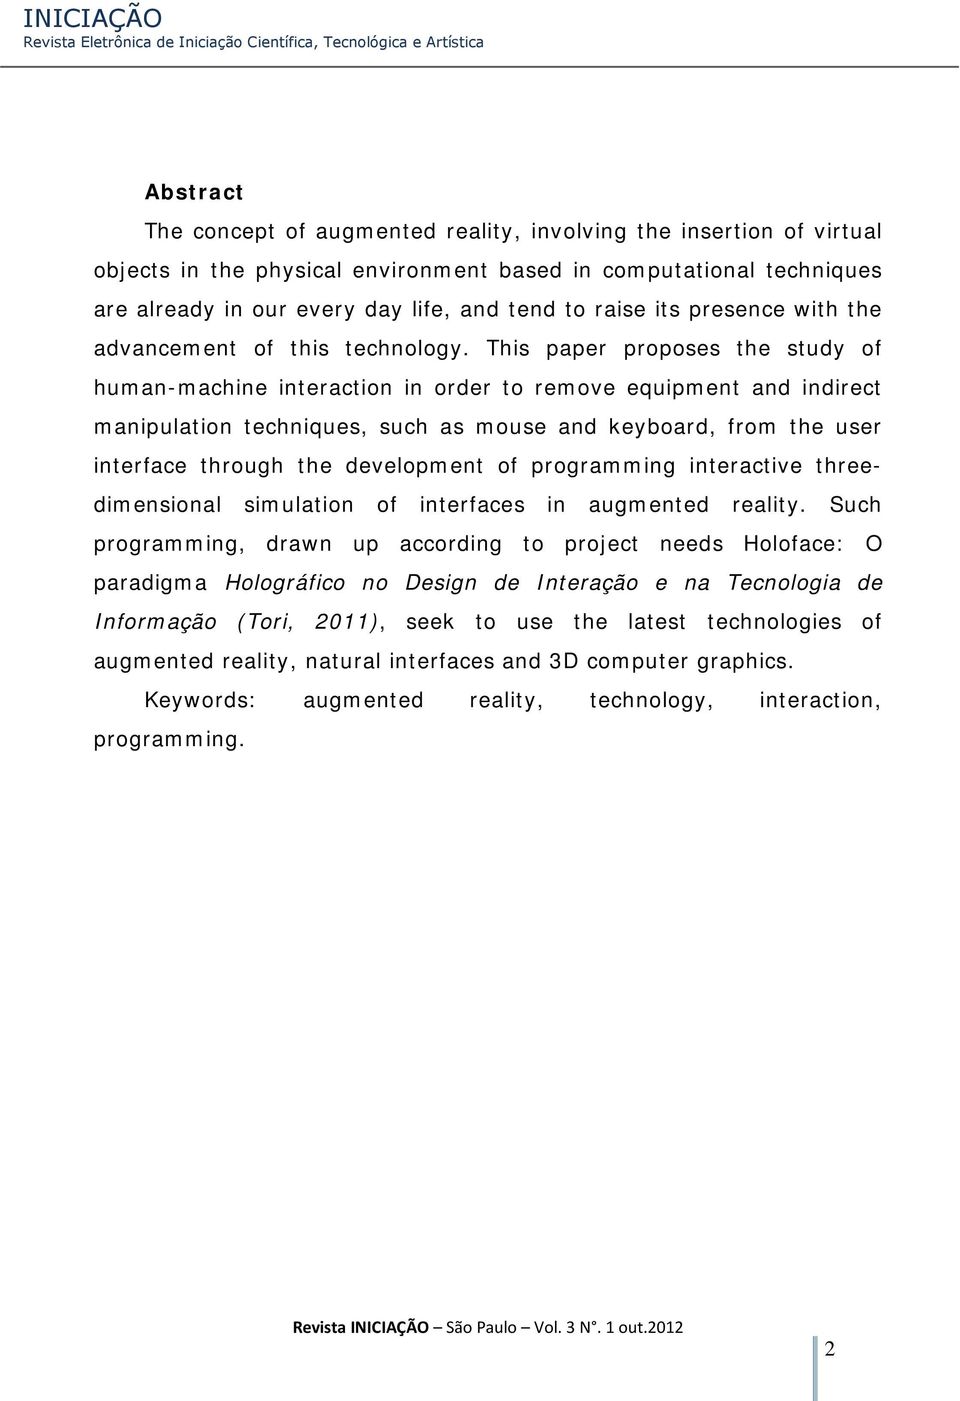 This paper proposes the study of human-machine interaction in order to remove equipment and indirect manipulation techniques, such as mouse and keyboard, from the user interface through the